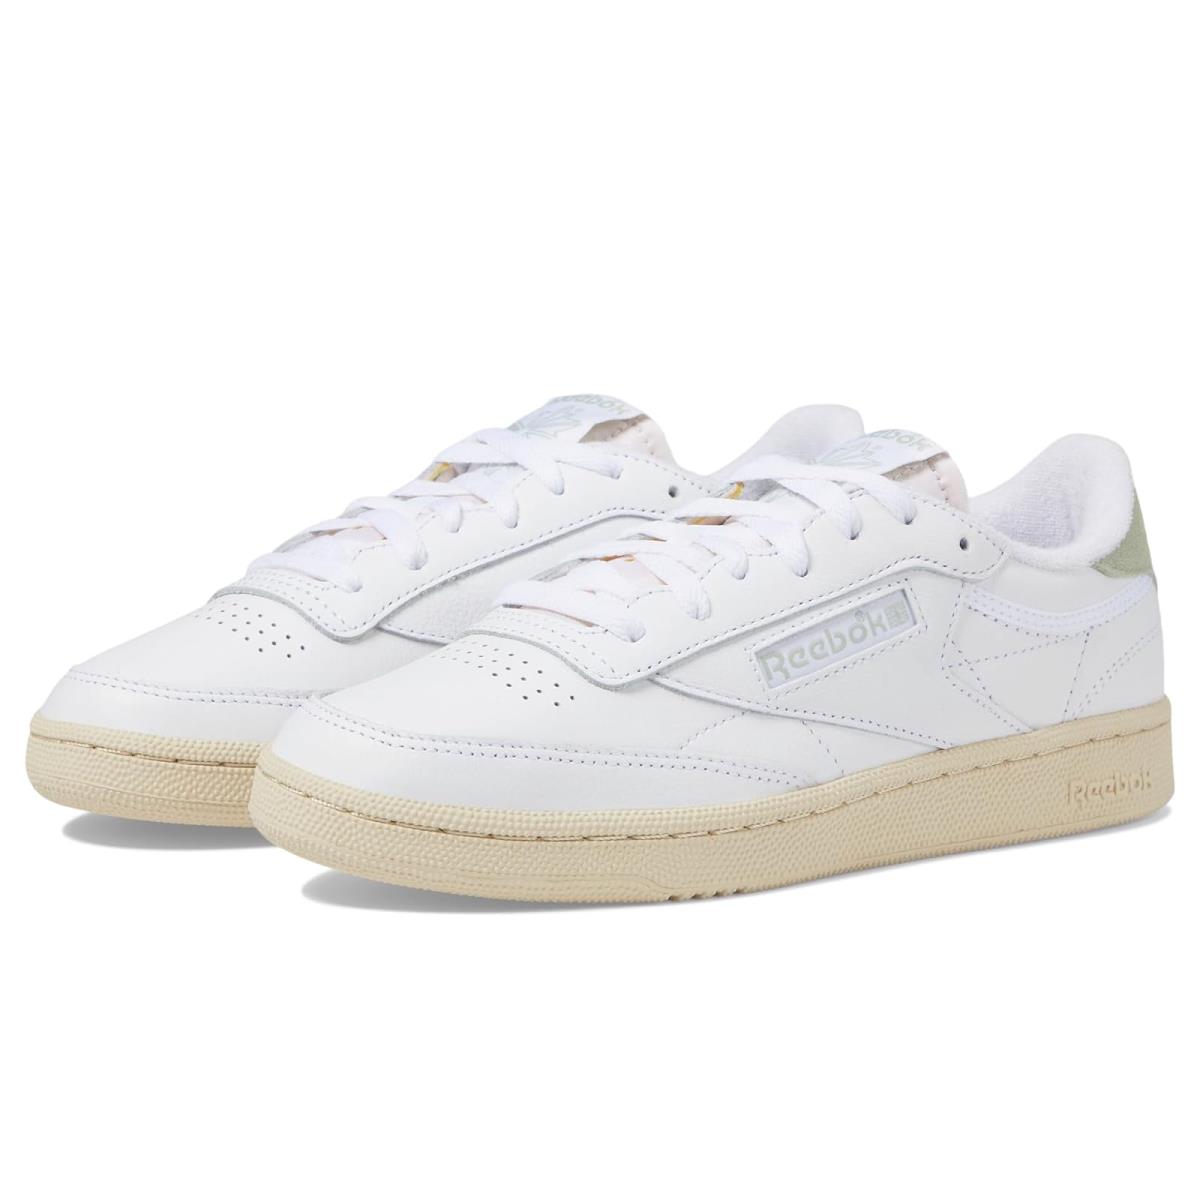 Woman`s Sneakers Athletic Shoes Reebok Lifestyle Club C 85 White/Paper White/Vintage Green